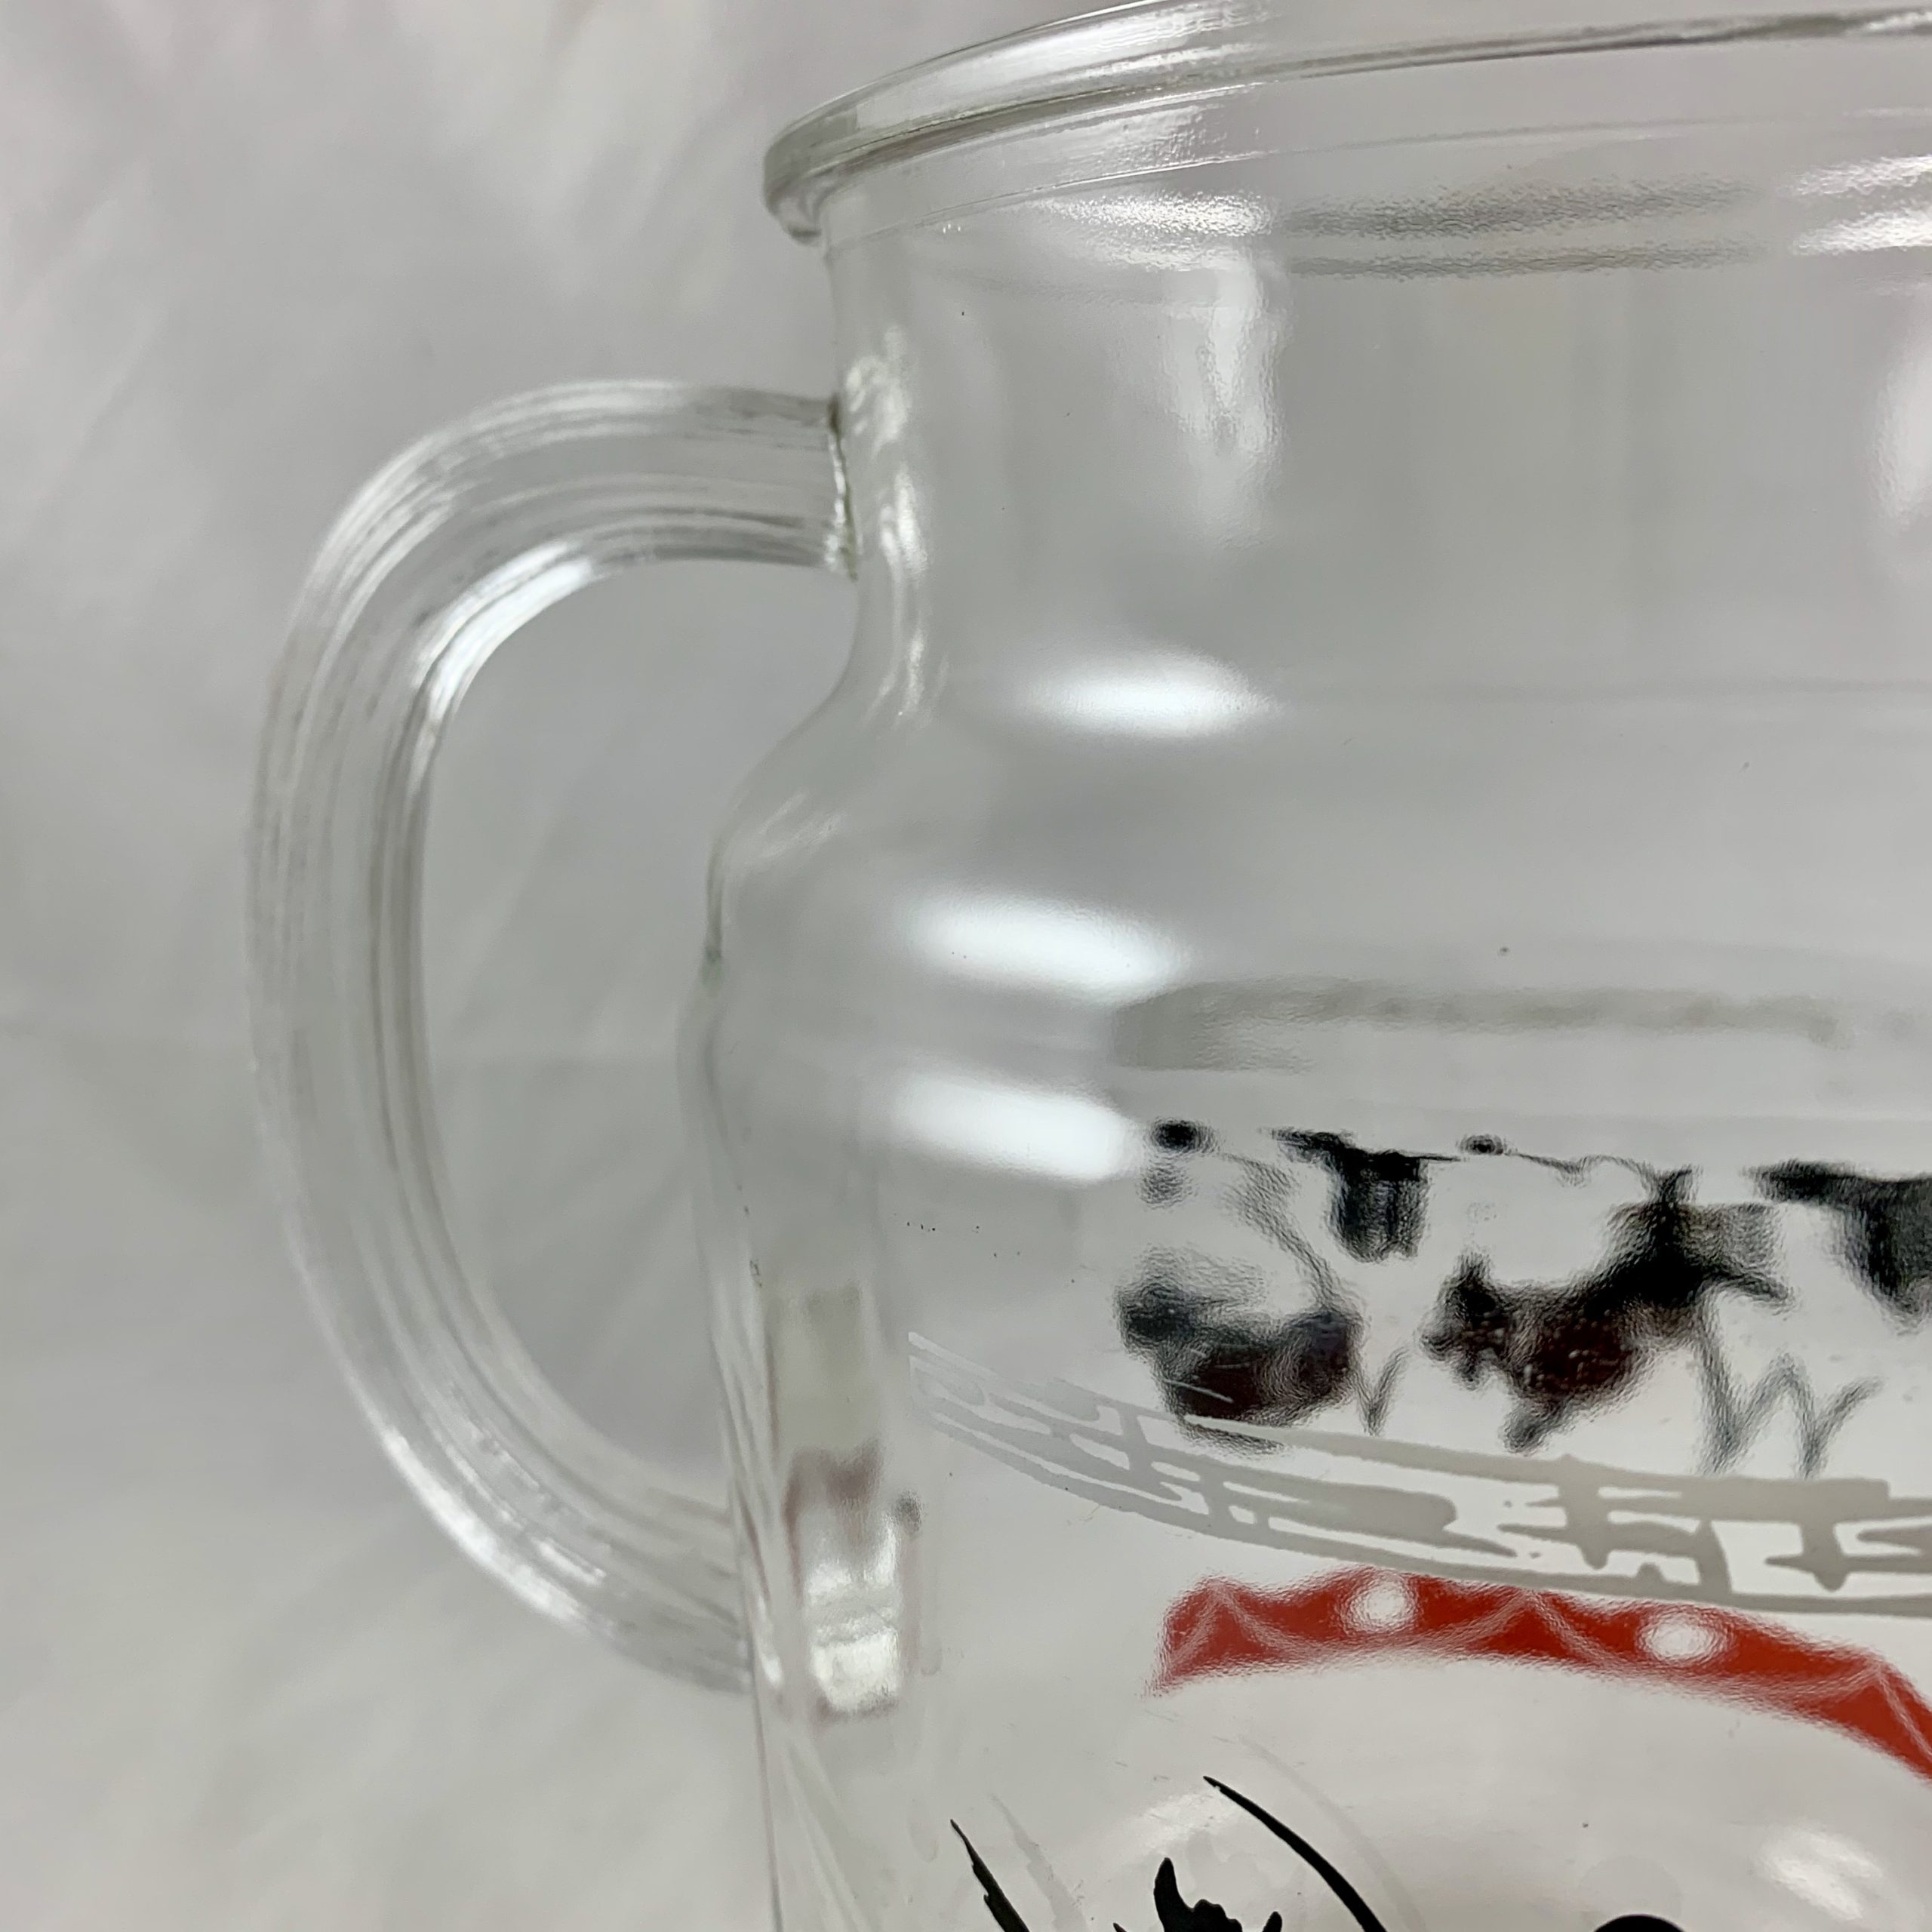 1940s Scottie Dog Clear Glass Pitcher, Red & Black Scottie Dogs and Stars,  Ice Lip Spout, Heavy Clear Glass, Vintage Serving Pitcher, MCM 